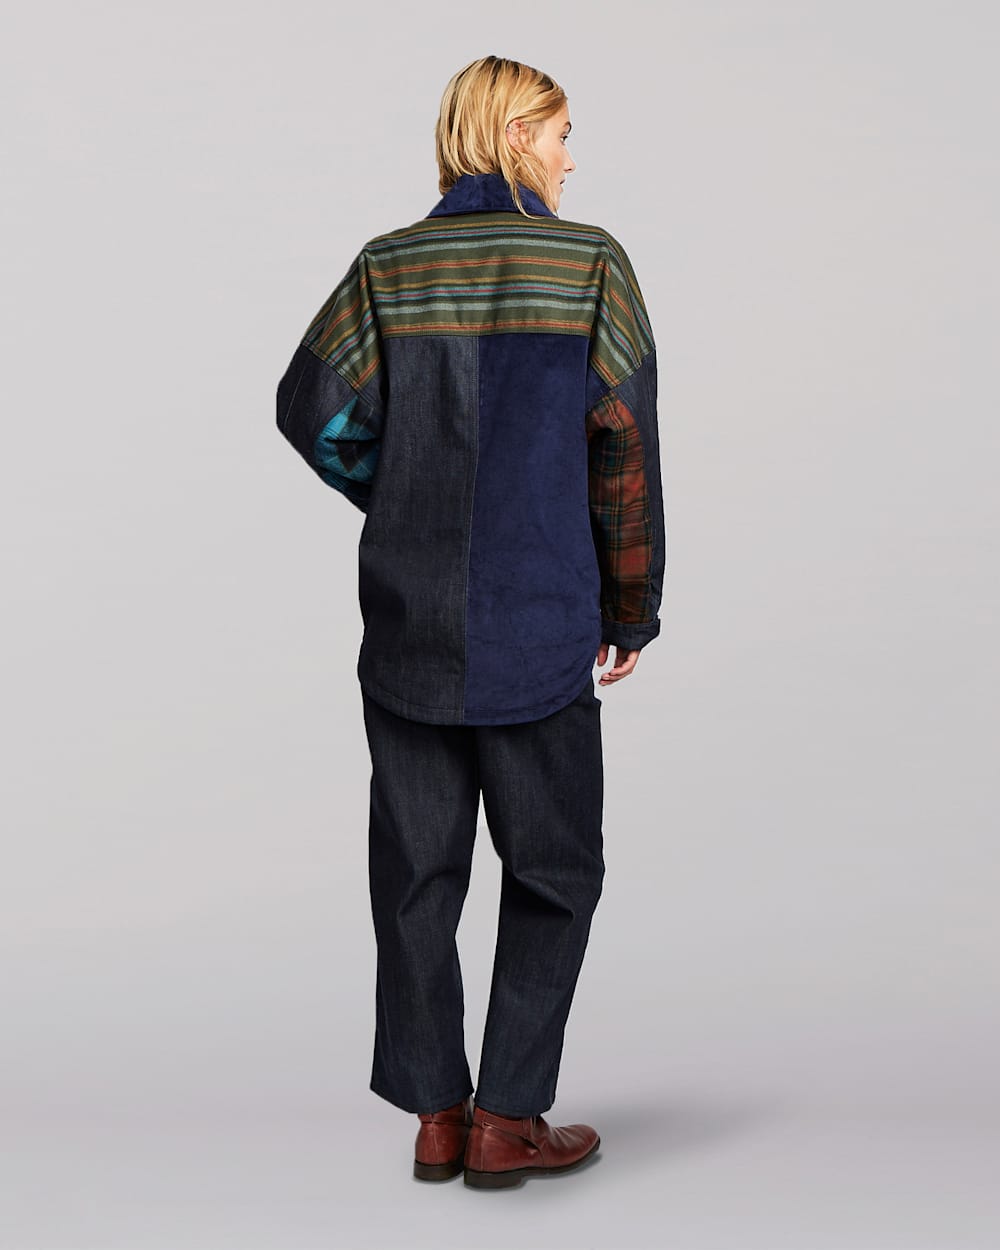 ALTERNATE VIEW OF LEE X PENDLETON PATCHWORK CHORE JACKET IN PATCHWORK image number 2